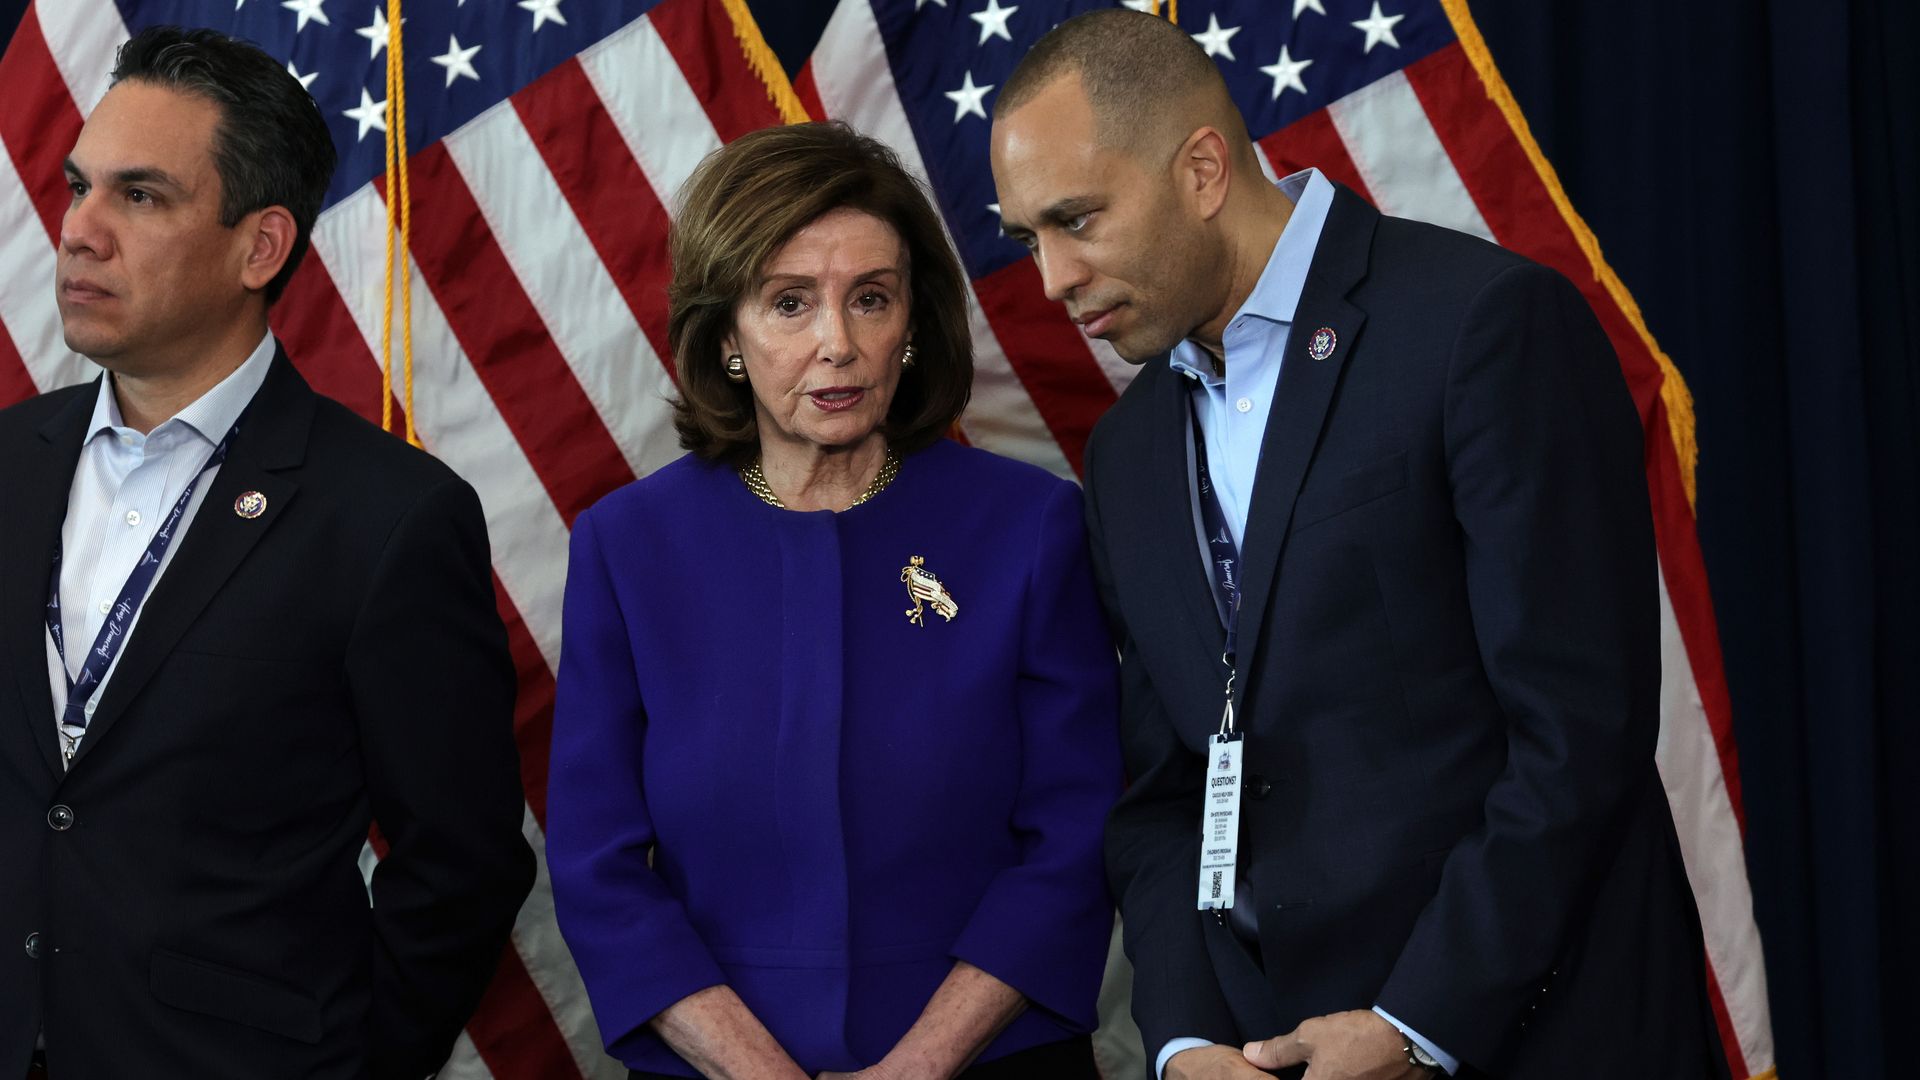 U.S. Speaker of the House Rep. Nancy Pelosi (D-CA) (C), Rep. Pete Aguilar (D-CA) (L) and Democratic Caucus Chairman Hakeem Jeffries (D-NY) (R) listen during a news conference s)